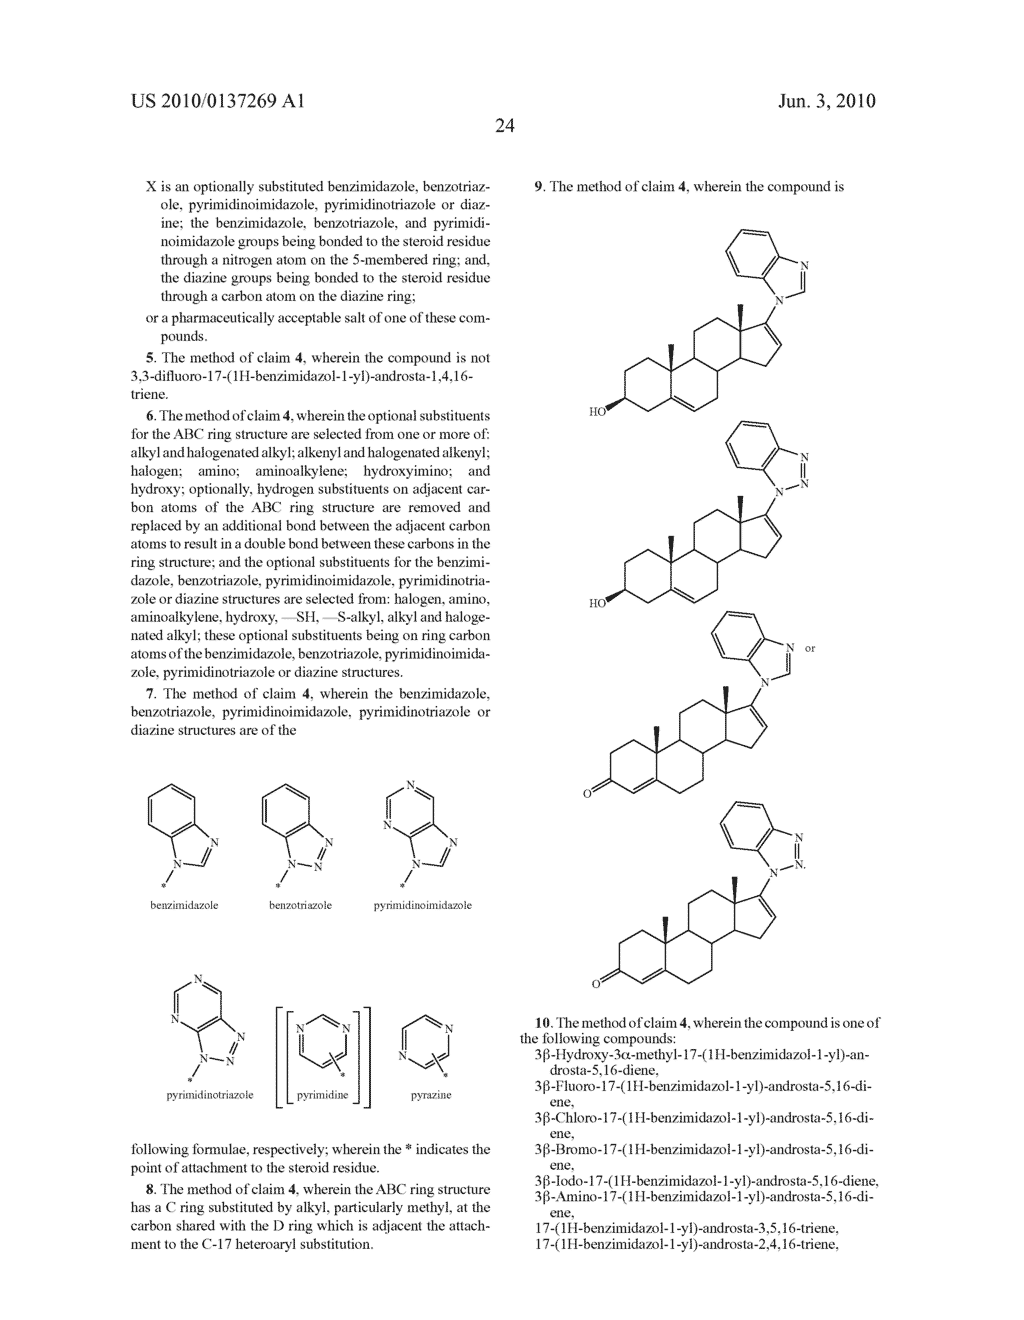 Novel C-17-Heteroaryl Steroidal Cyp17 Inhibitors/Antiandrogens: Synehesis, In Vitro Biological Activities, Pharmacokinetics and Antitumor Activity - diagram, schematic, and image 33